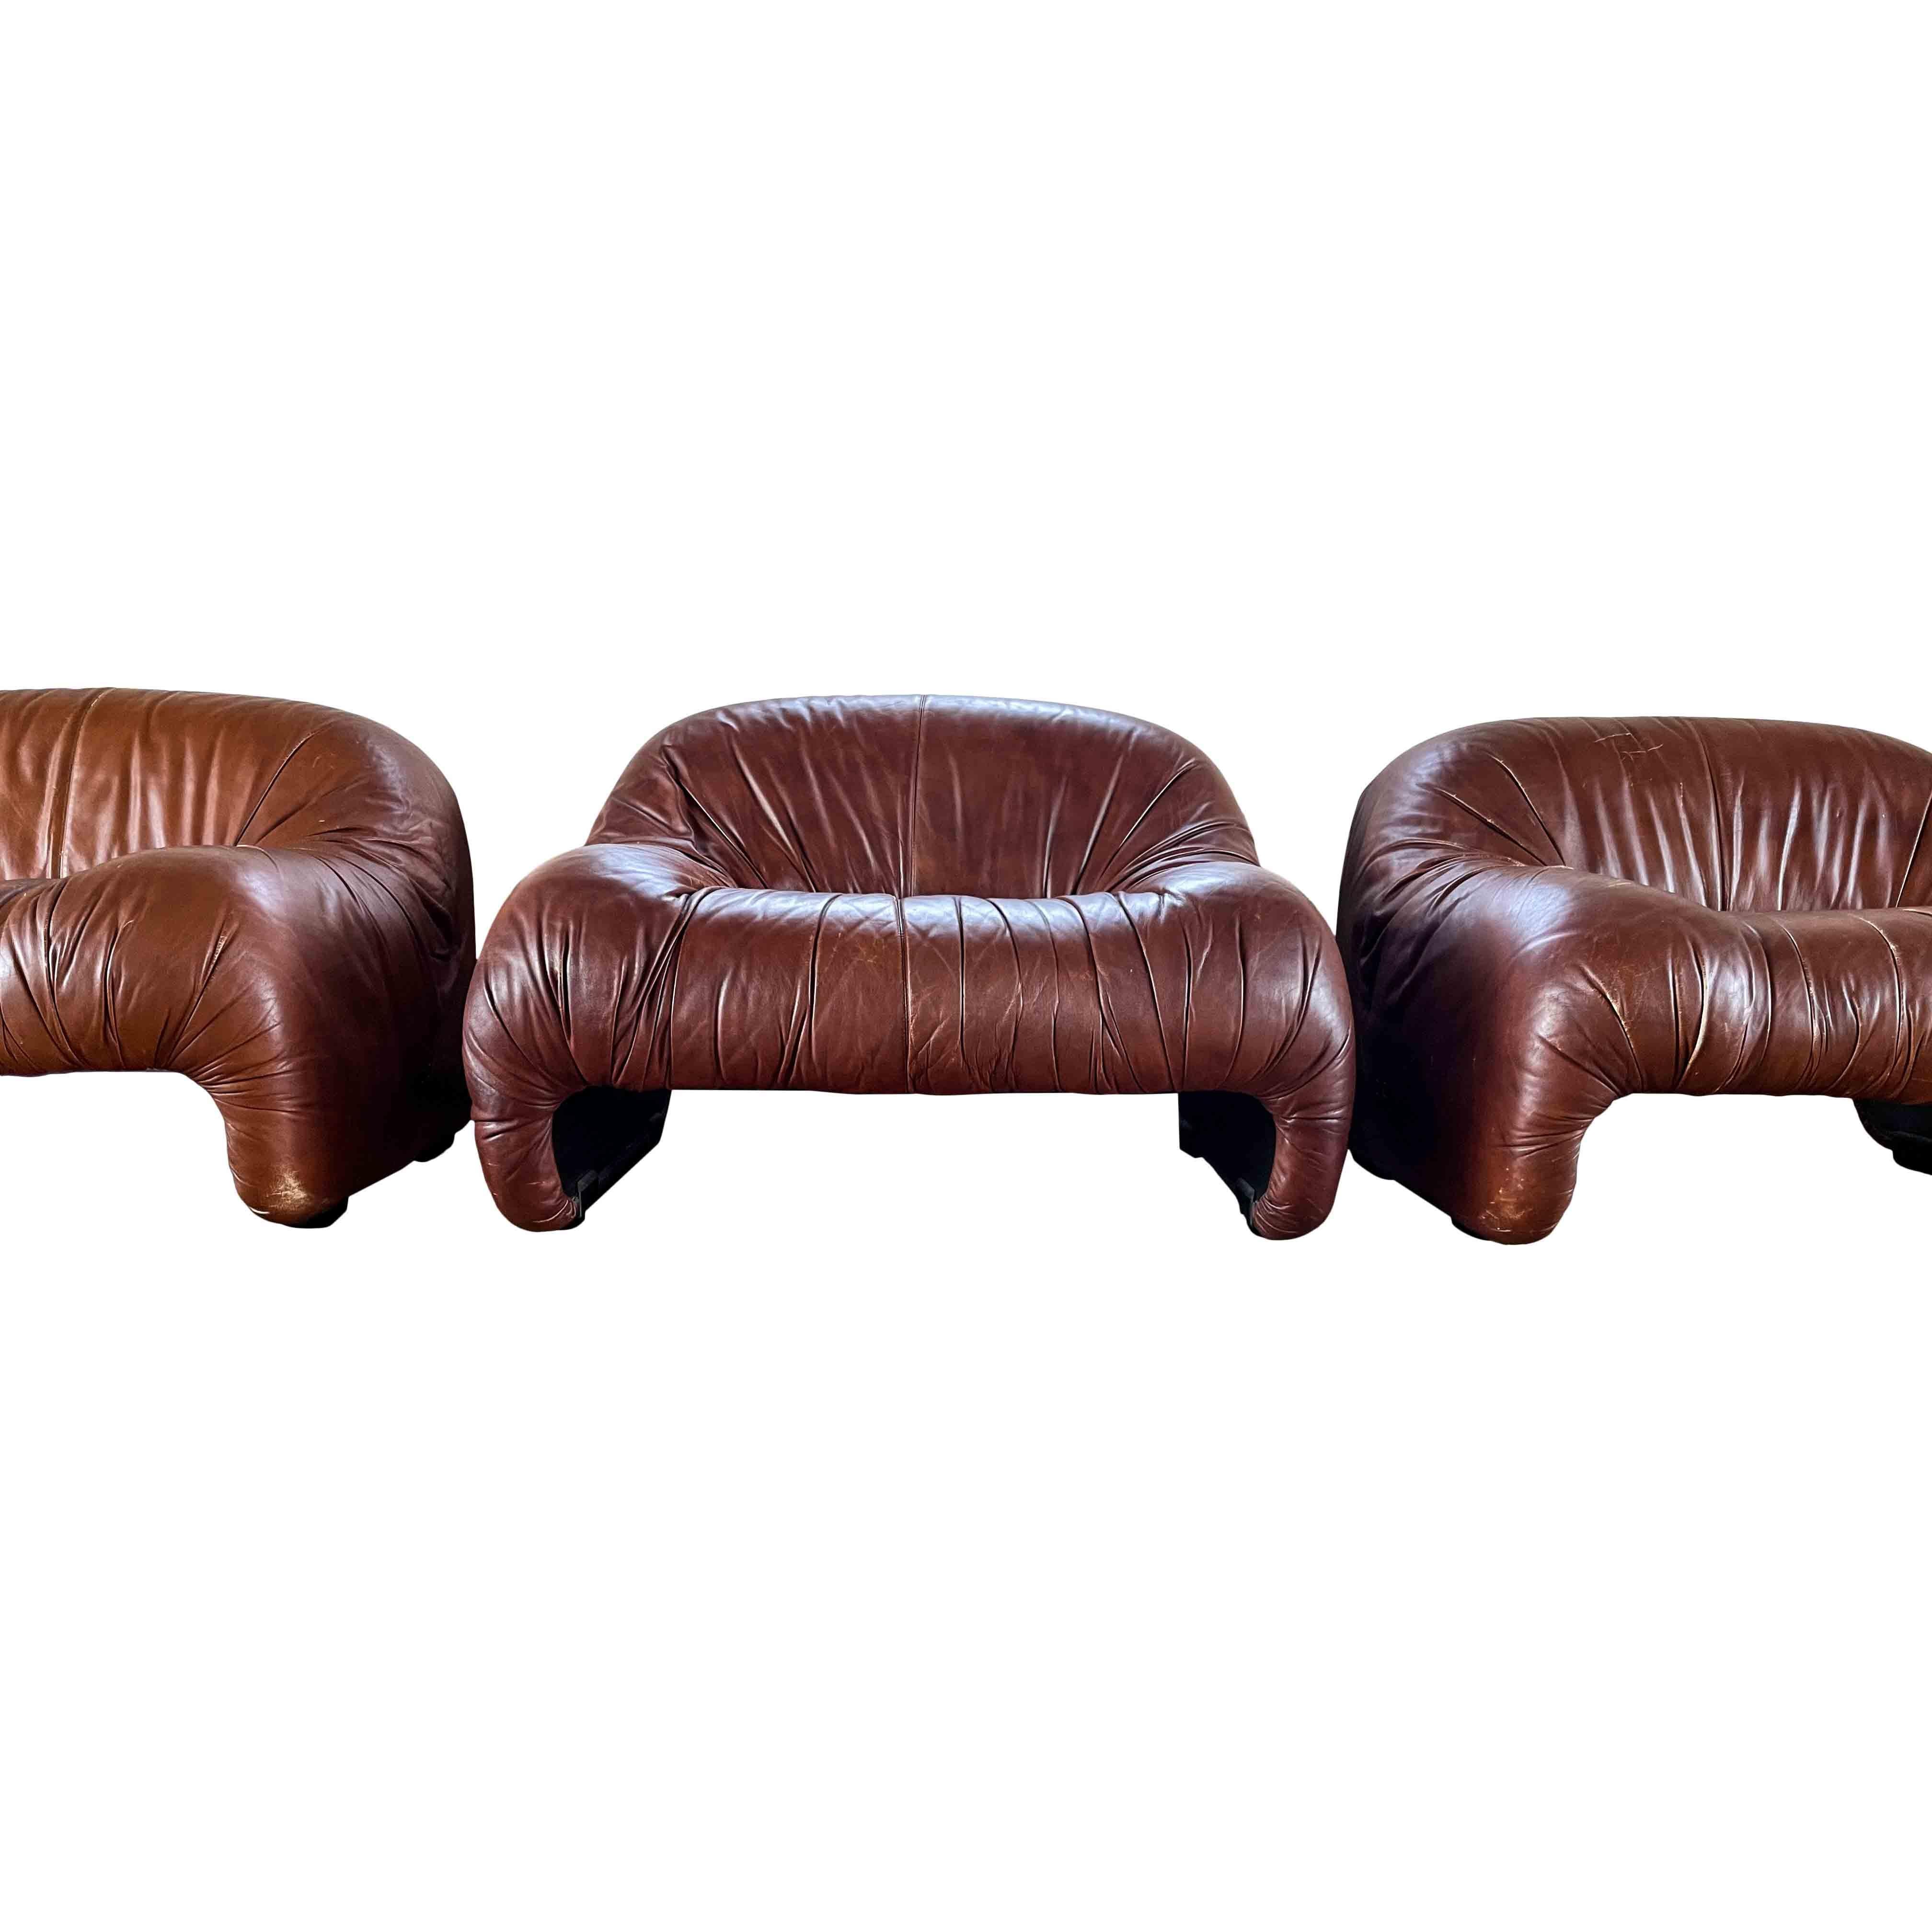 Afra and Tobia Scarpa Brown Bonanza Lounge Chair for C&B Italia, 1970, Set of 3 In Good Condition For Sale In Vicenza, IT